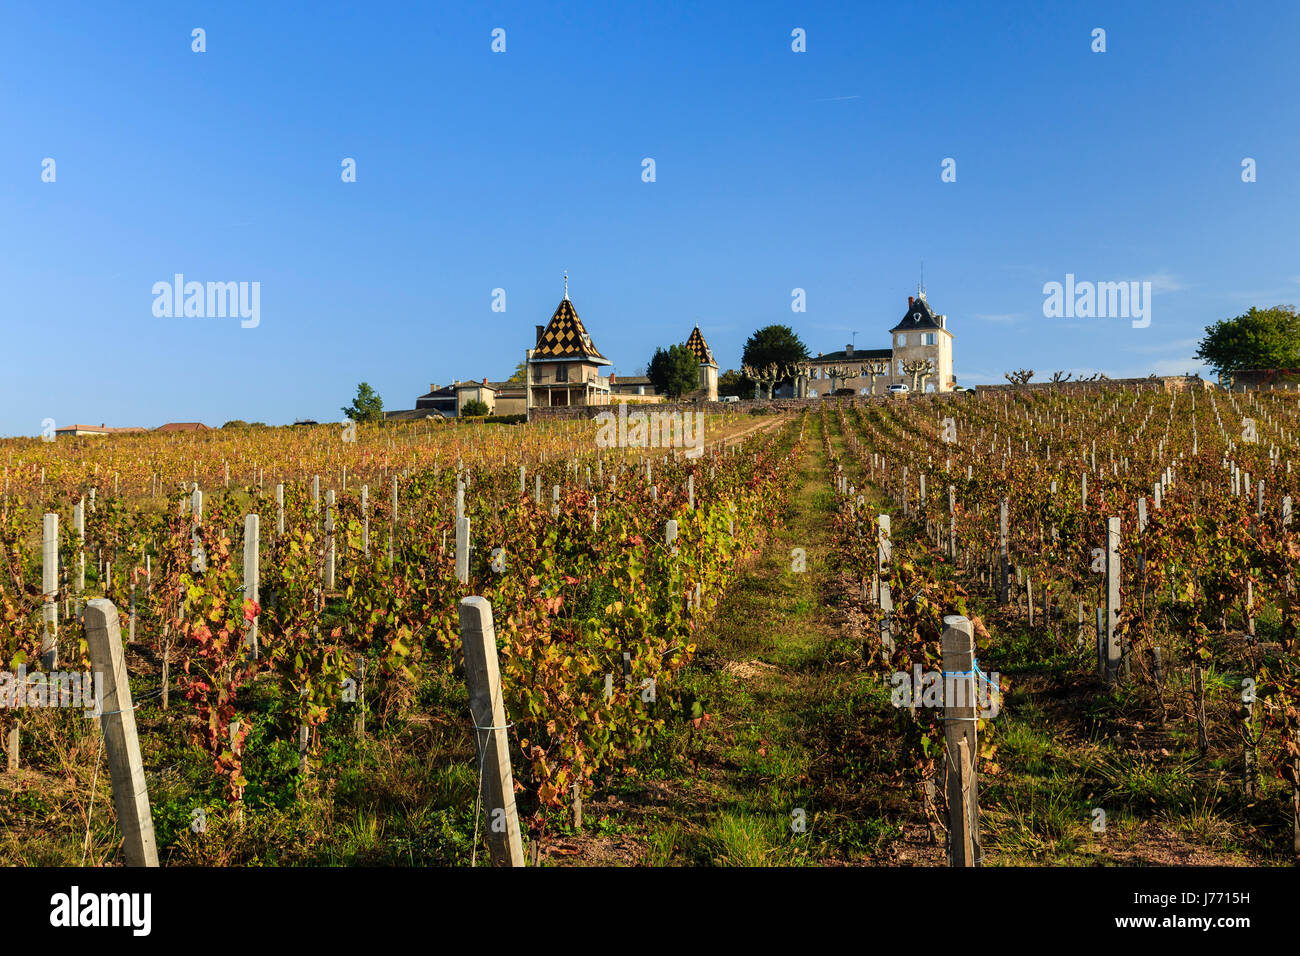 France, Saone et Loire, Beaujolais region, Romaneche Thorins, Portier castle and the vineyards of the Moulin a Vent in autumn Stock Photo